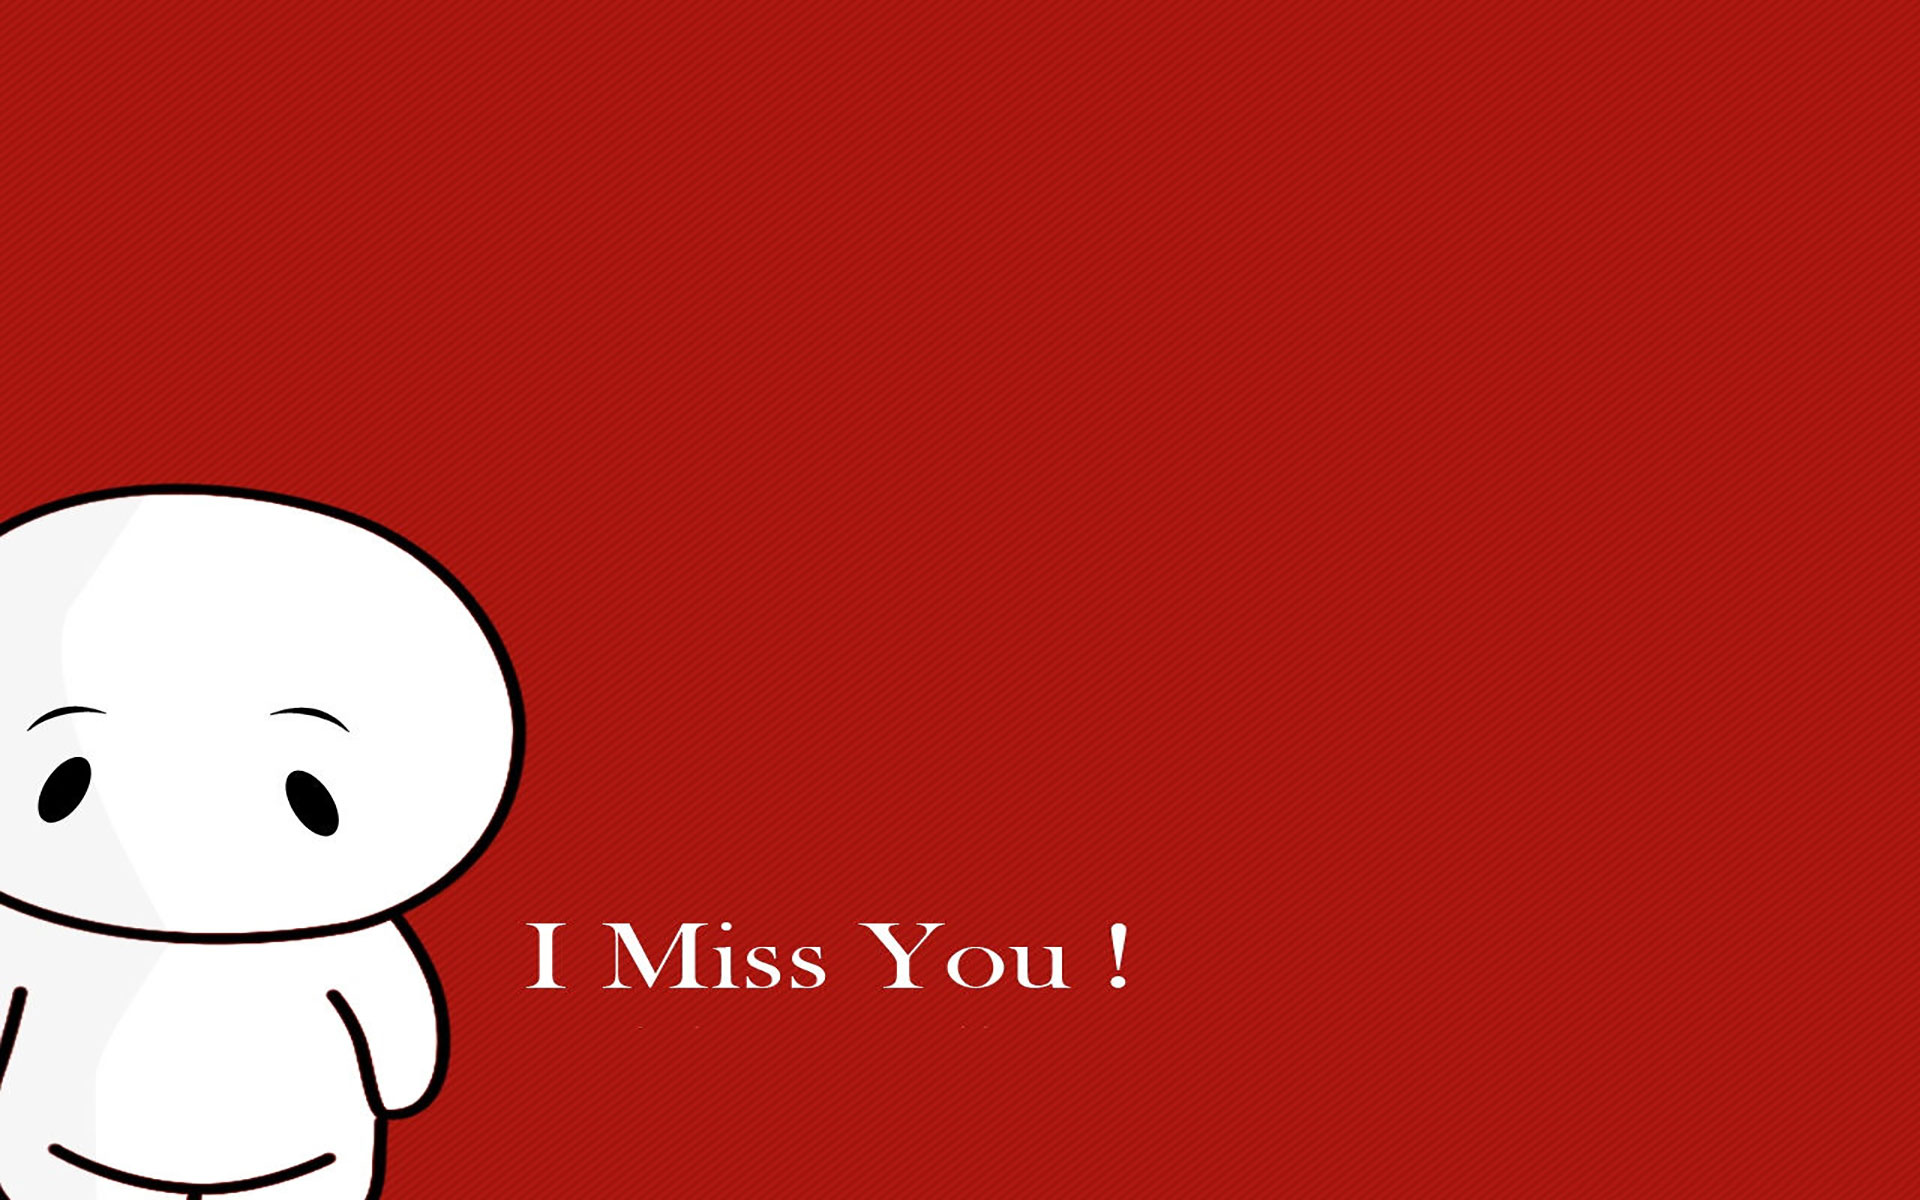 i miss you wallpaper,red,text,cartoon,font,smile